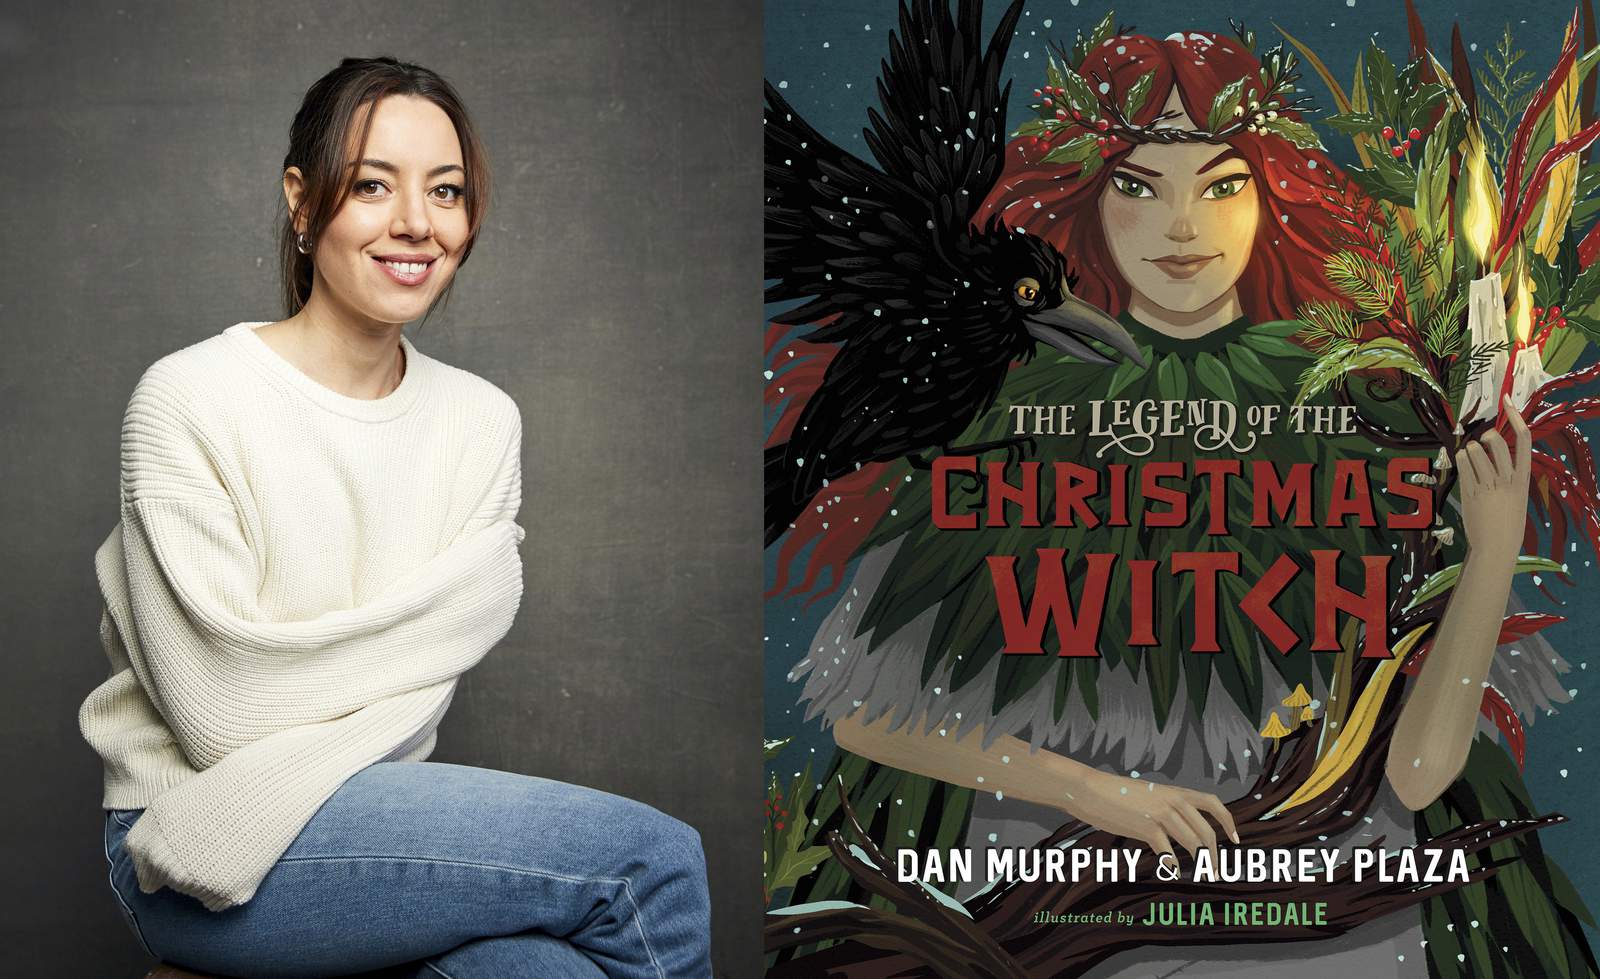 Aubrey Plaza book tells all — about Santa Claus' sister